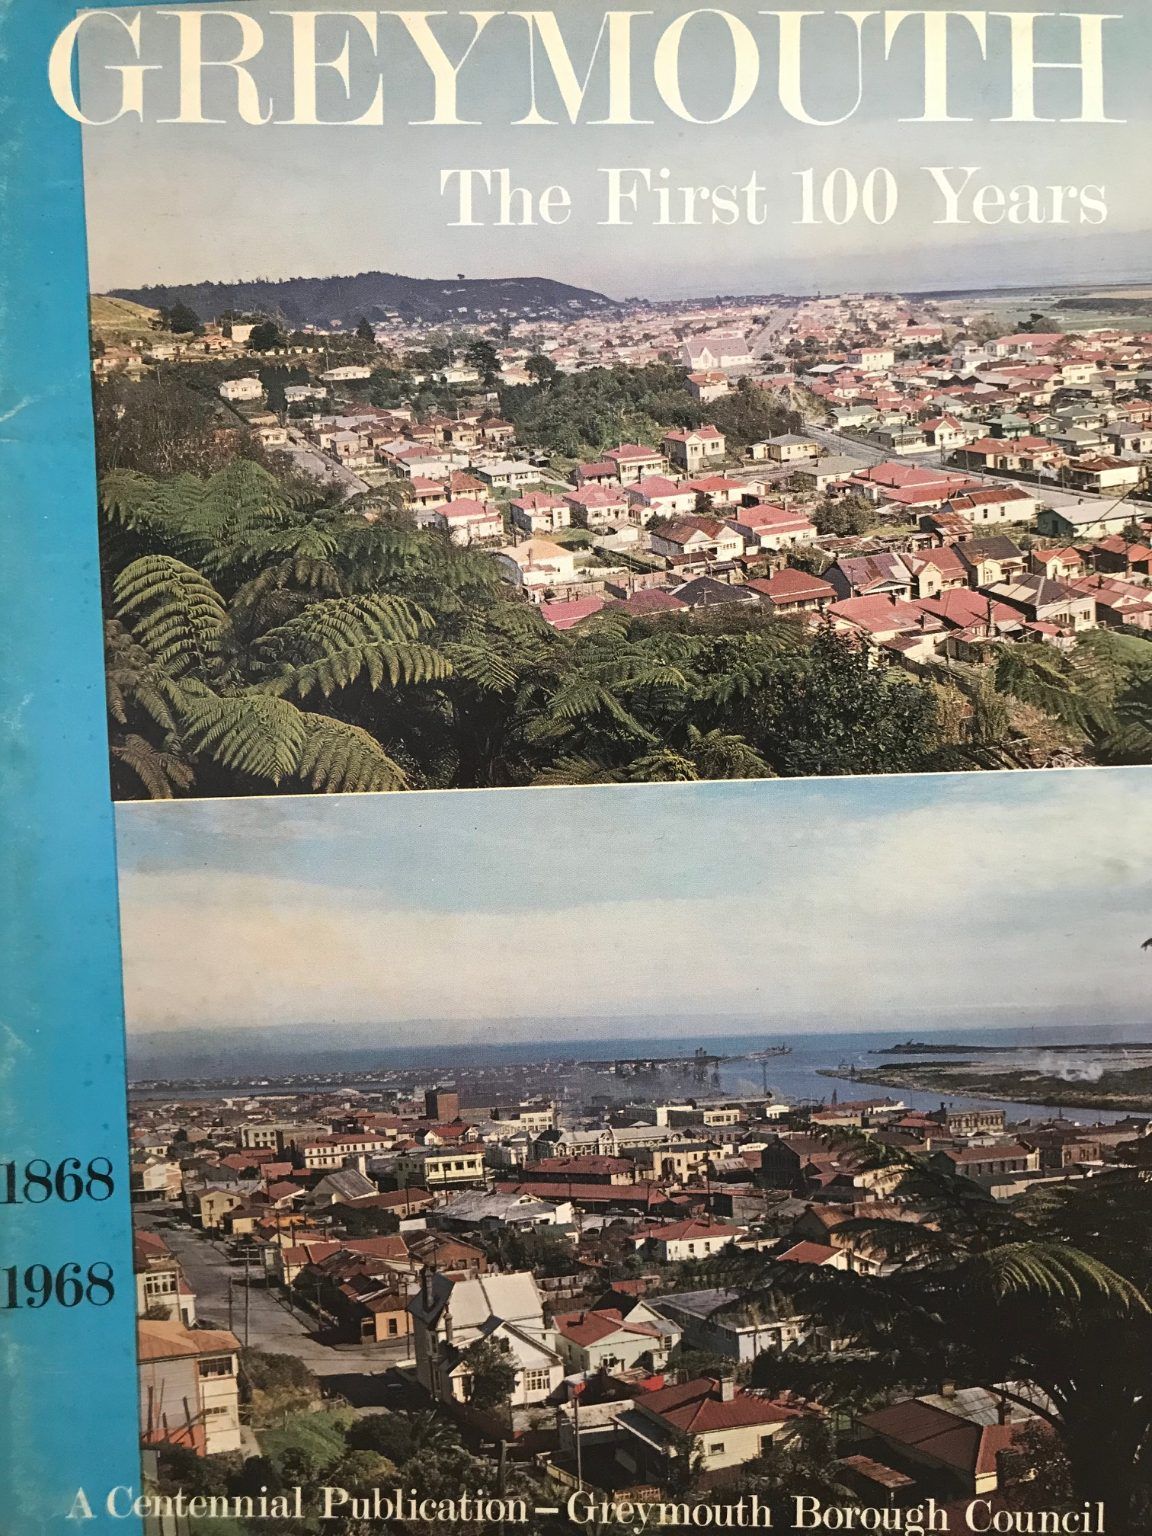 GREYMOUTH: The First 100 Years 1868 - 1968